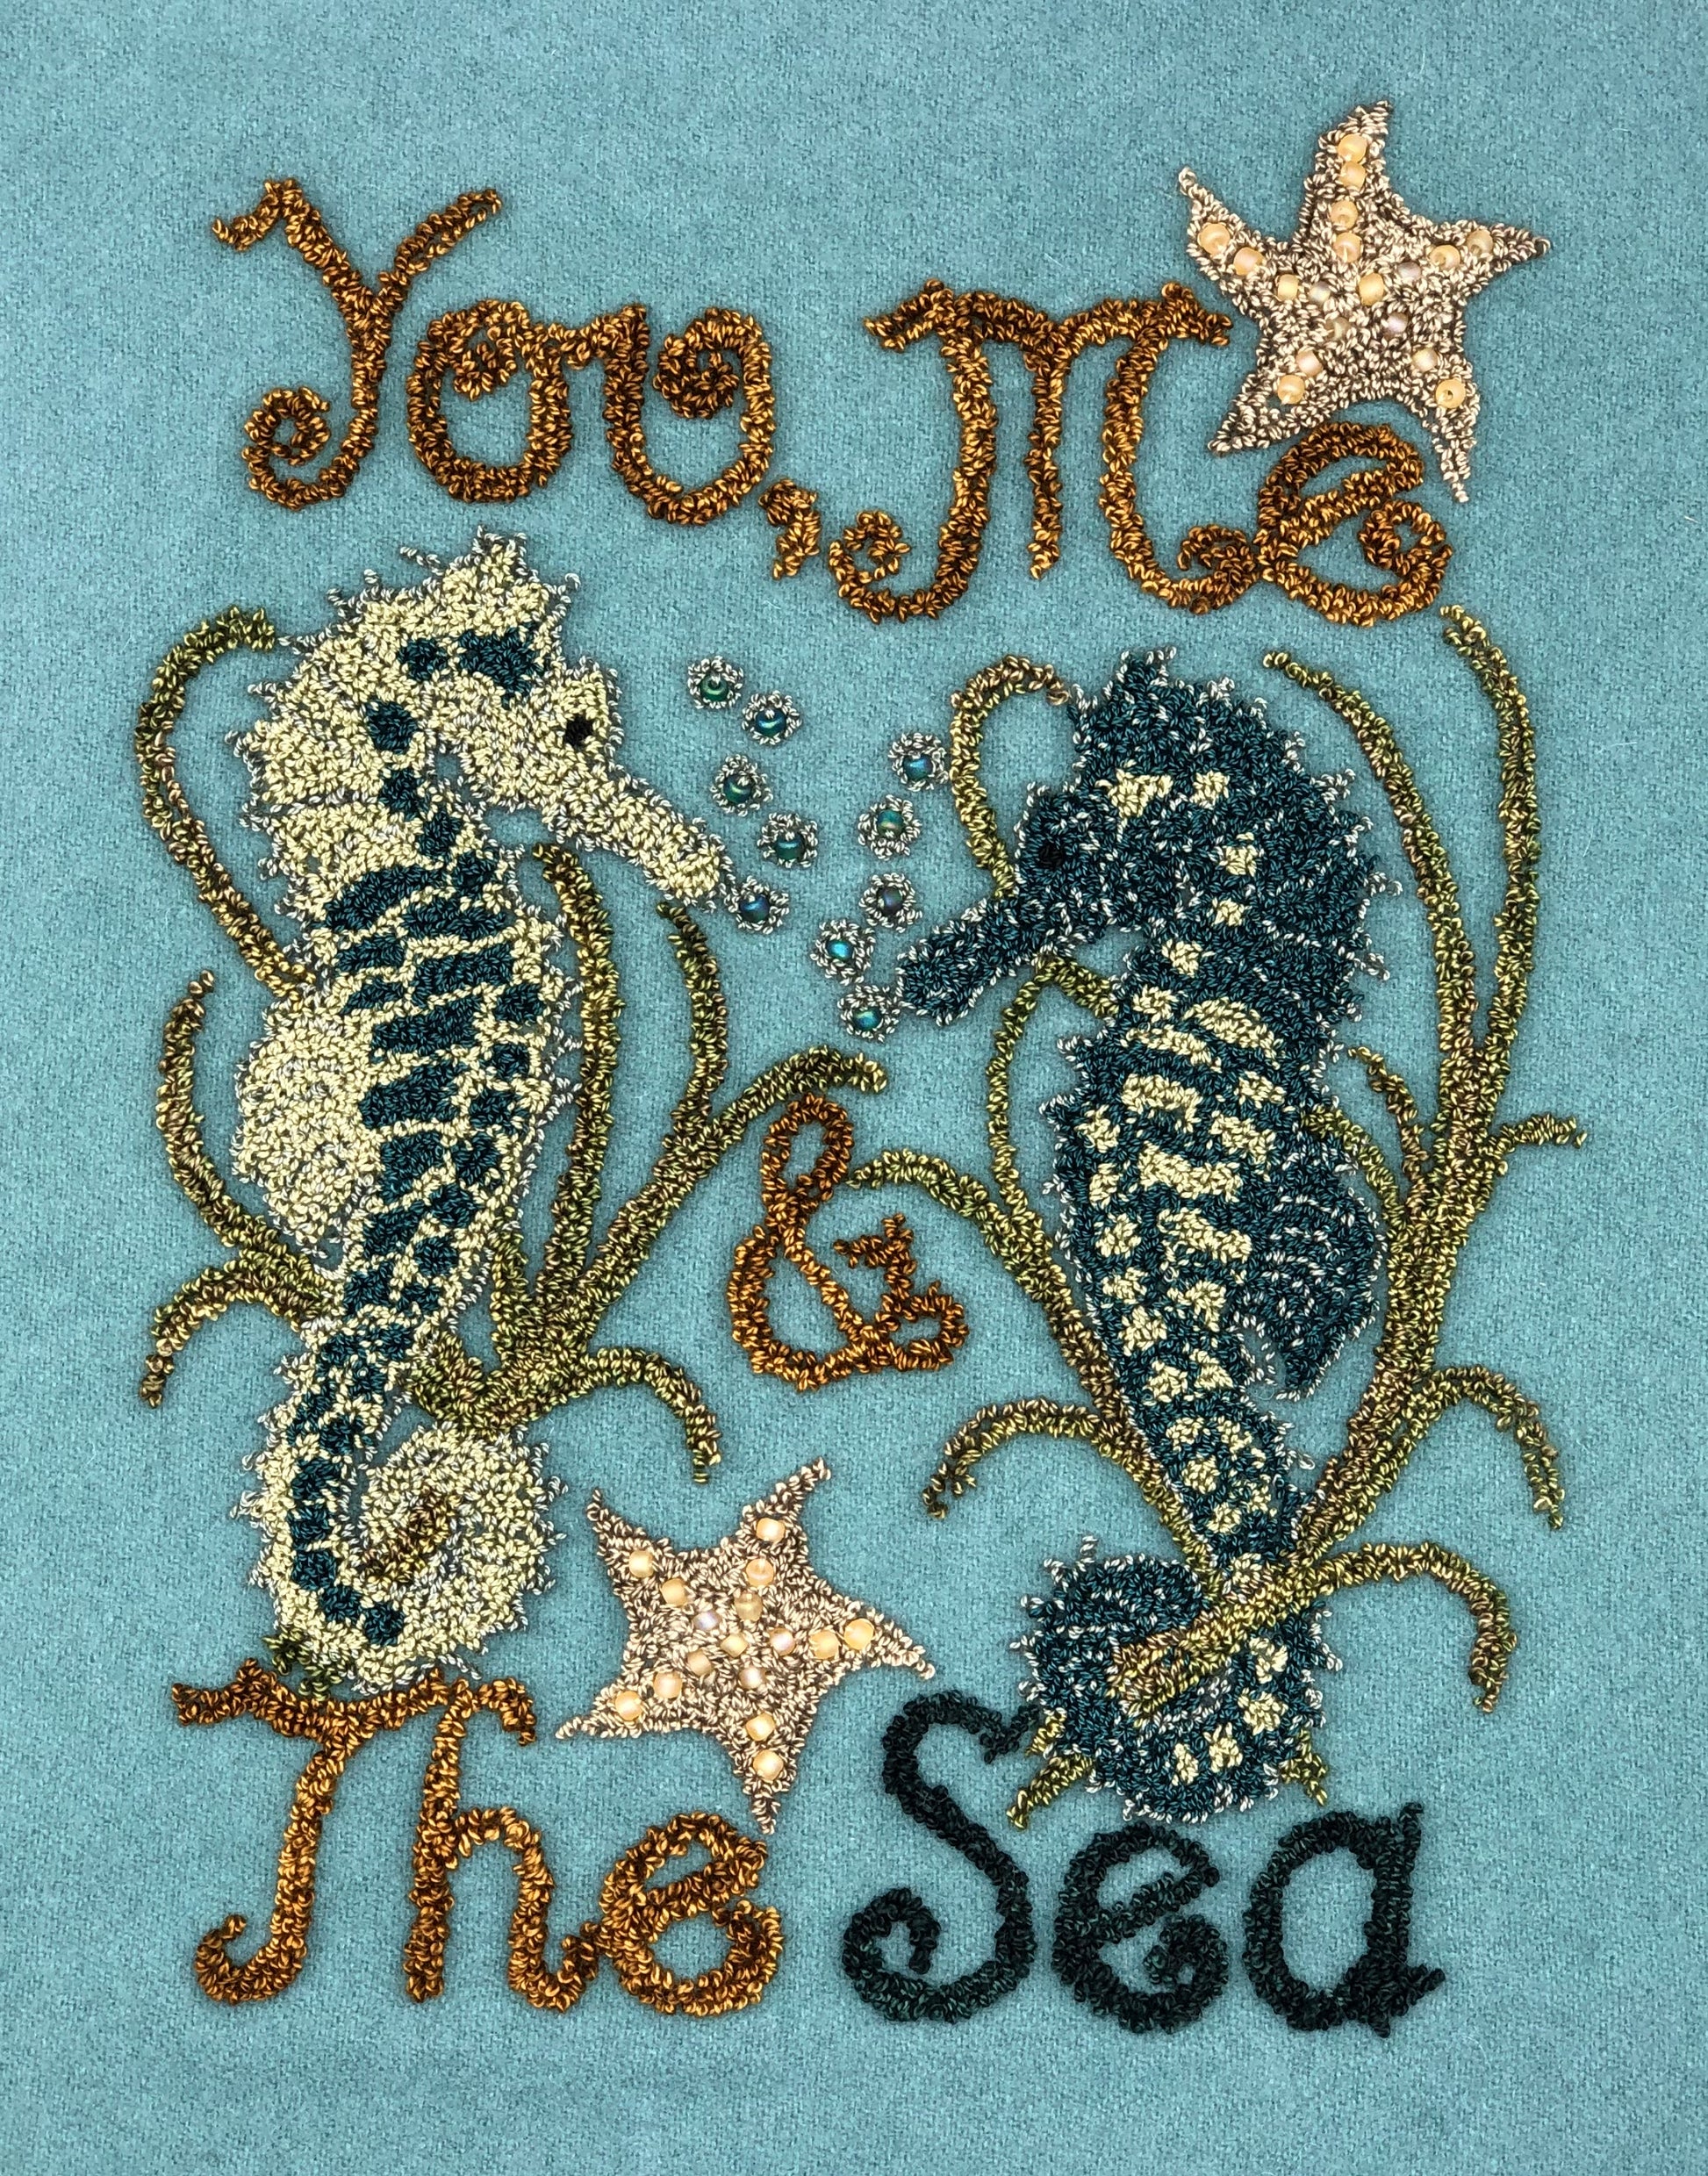 You, Me & The Sea- PDF Digital Download Punch Needle Pattern by Orphaned Wool. This wonderful under the sea pattern was created using wool fabric as the background fused with the weaver's cloth pattern. Small beads were also used to create the bubble effects.